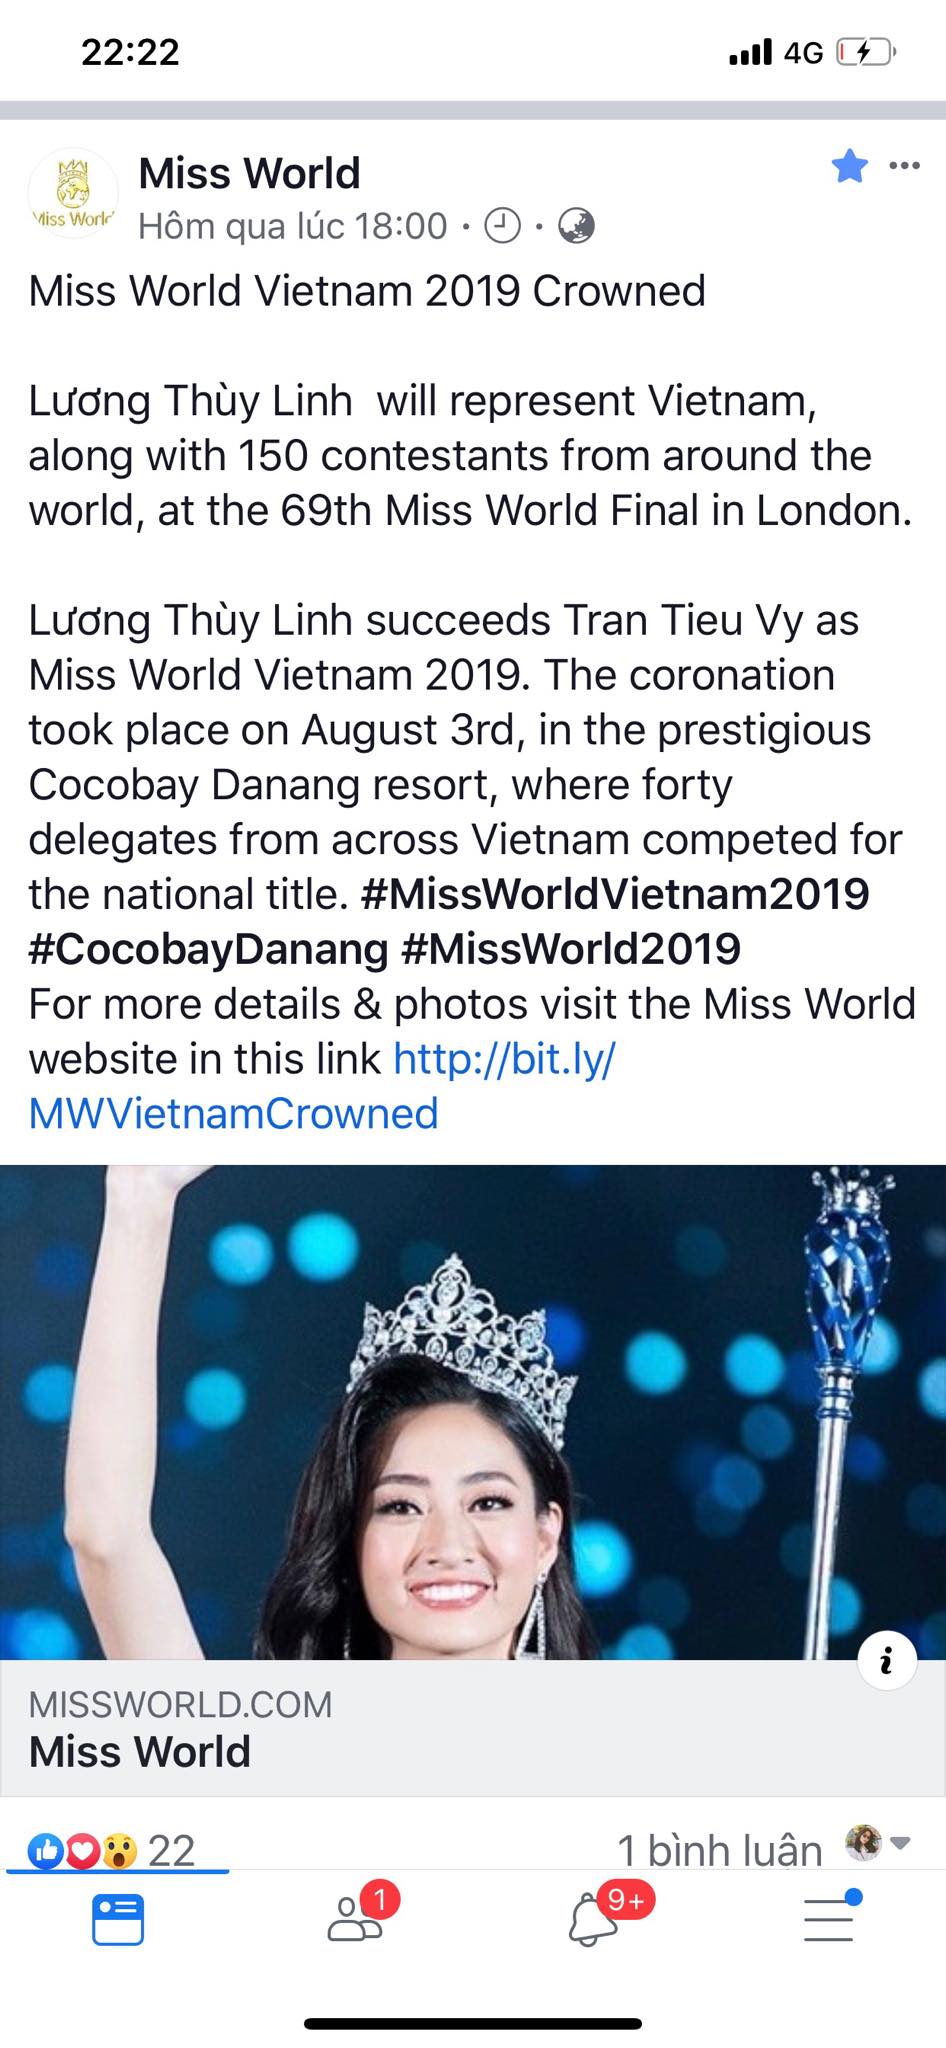 LUONG THUY LINH MISS WORLD (1)